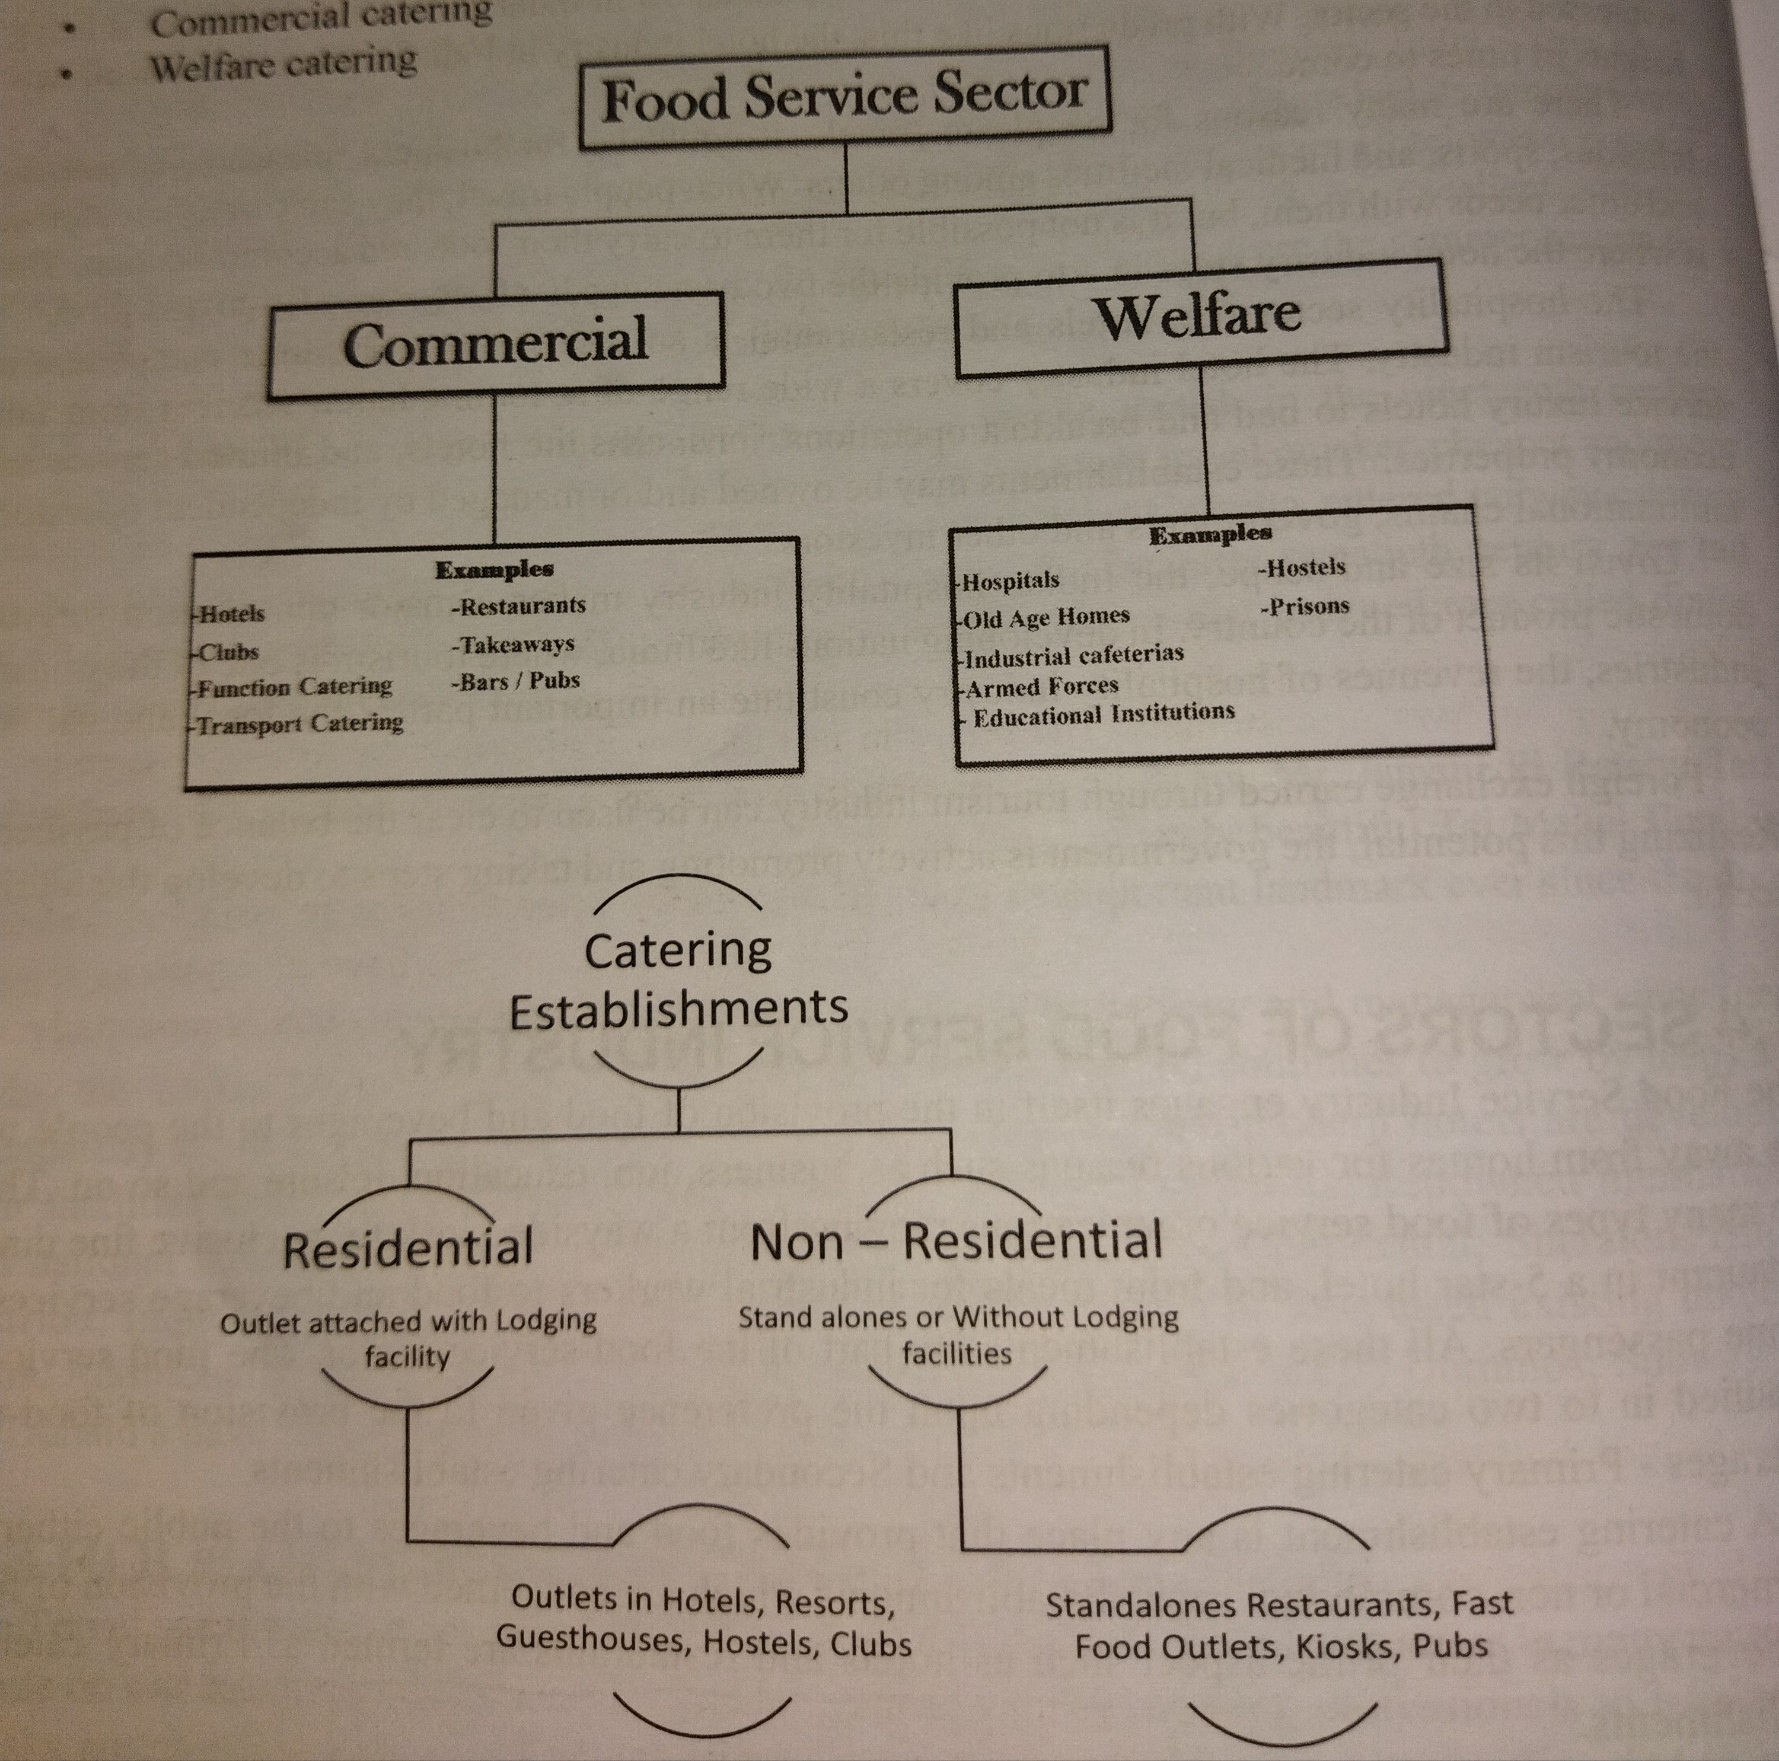 Food Service Sector